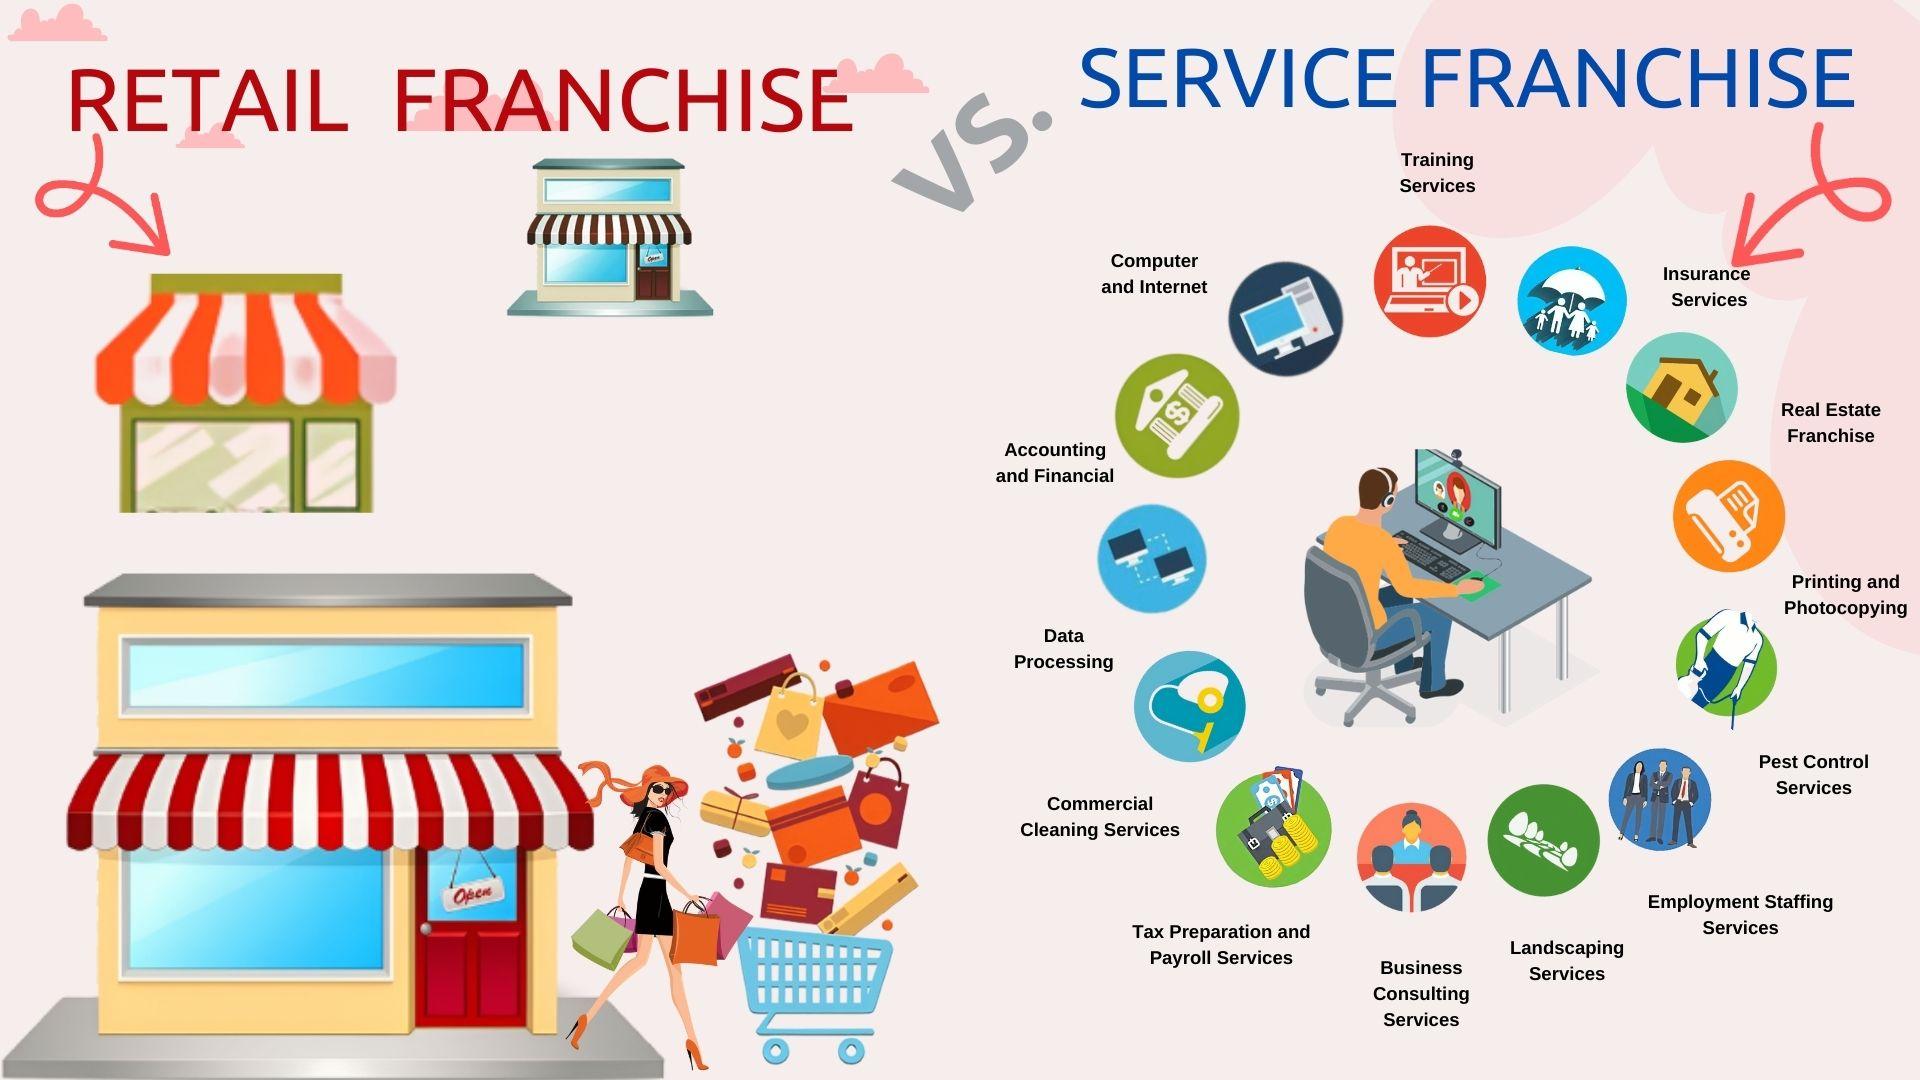 Service Franchise vs. Retail Franchise: What’s the Difference?